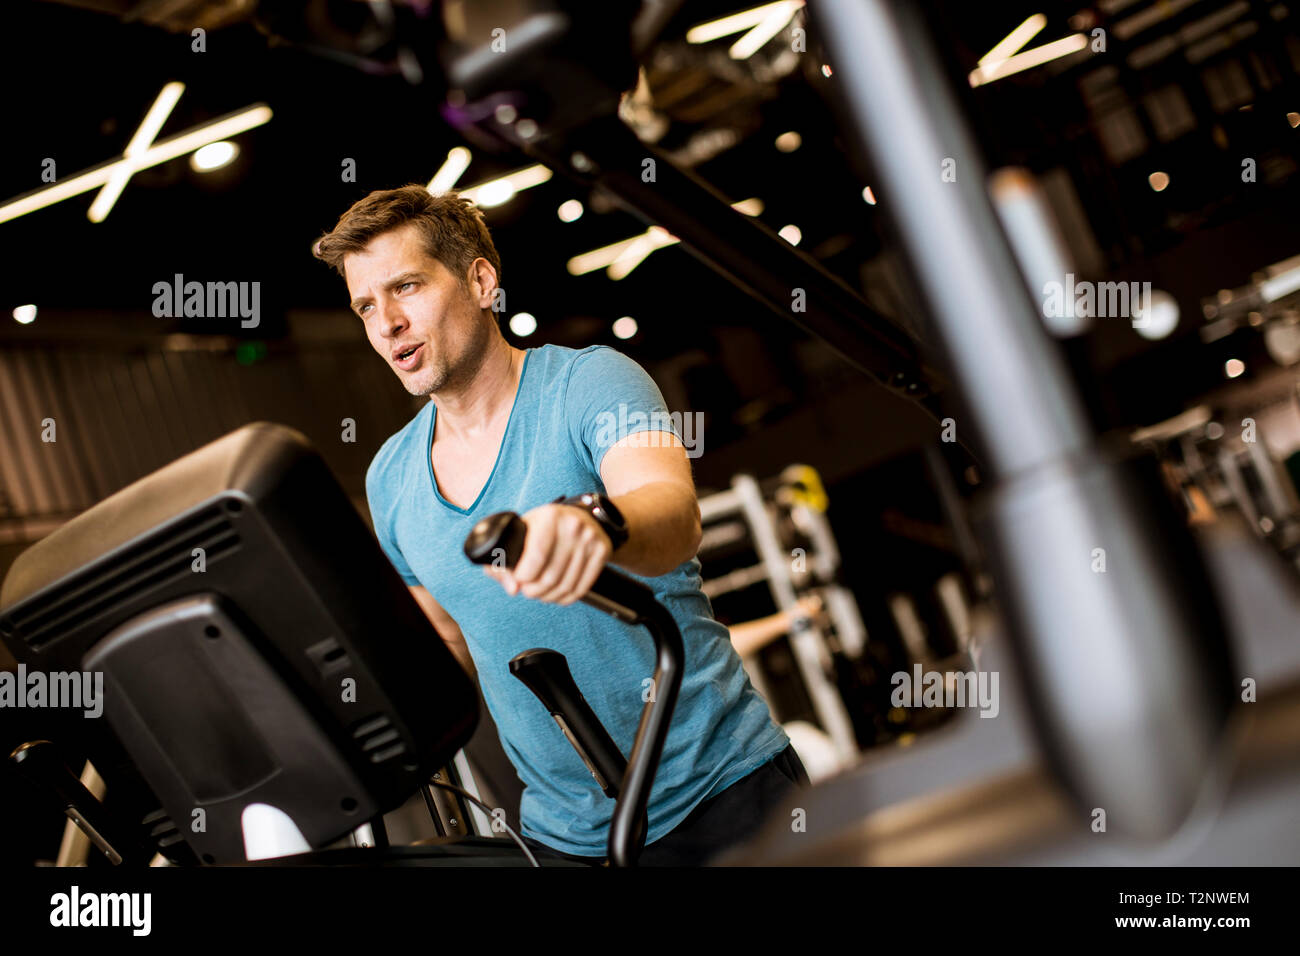 Young man doing exercise on elliptical cross trainer in sport fitness gym club Stock Photo